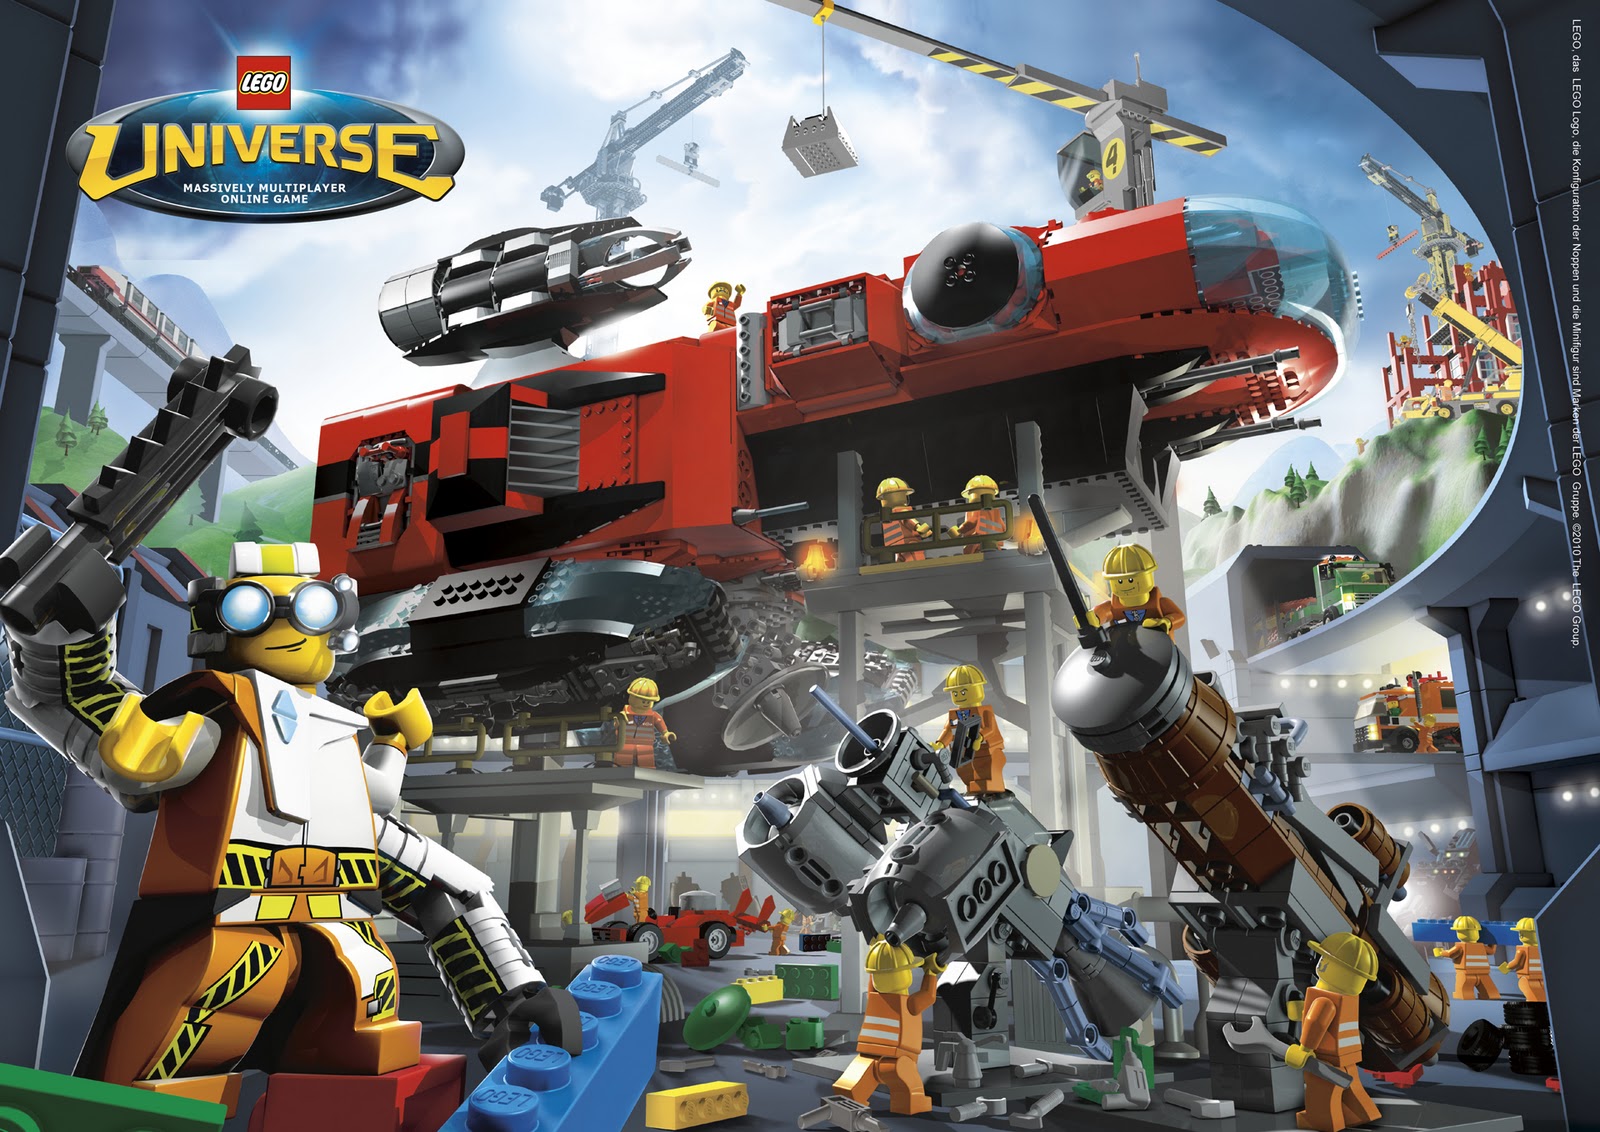 ... posters free lego universe download poster malstrom free lego universe